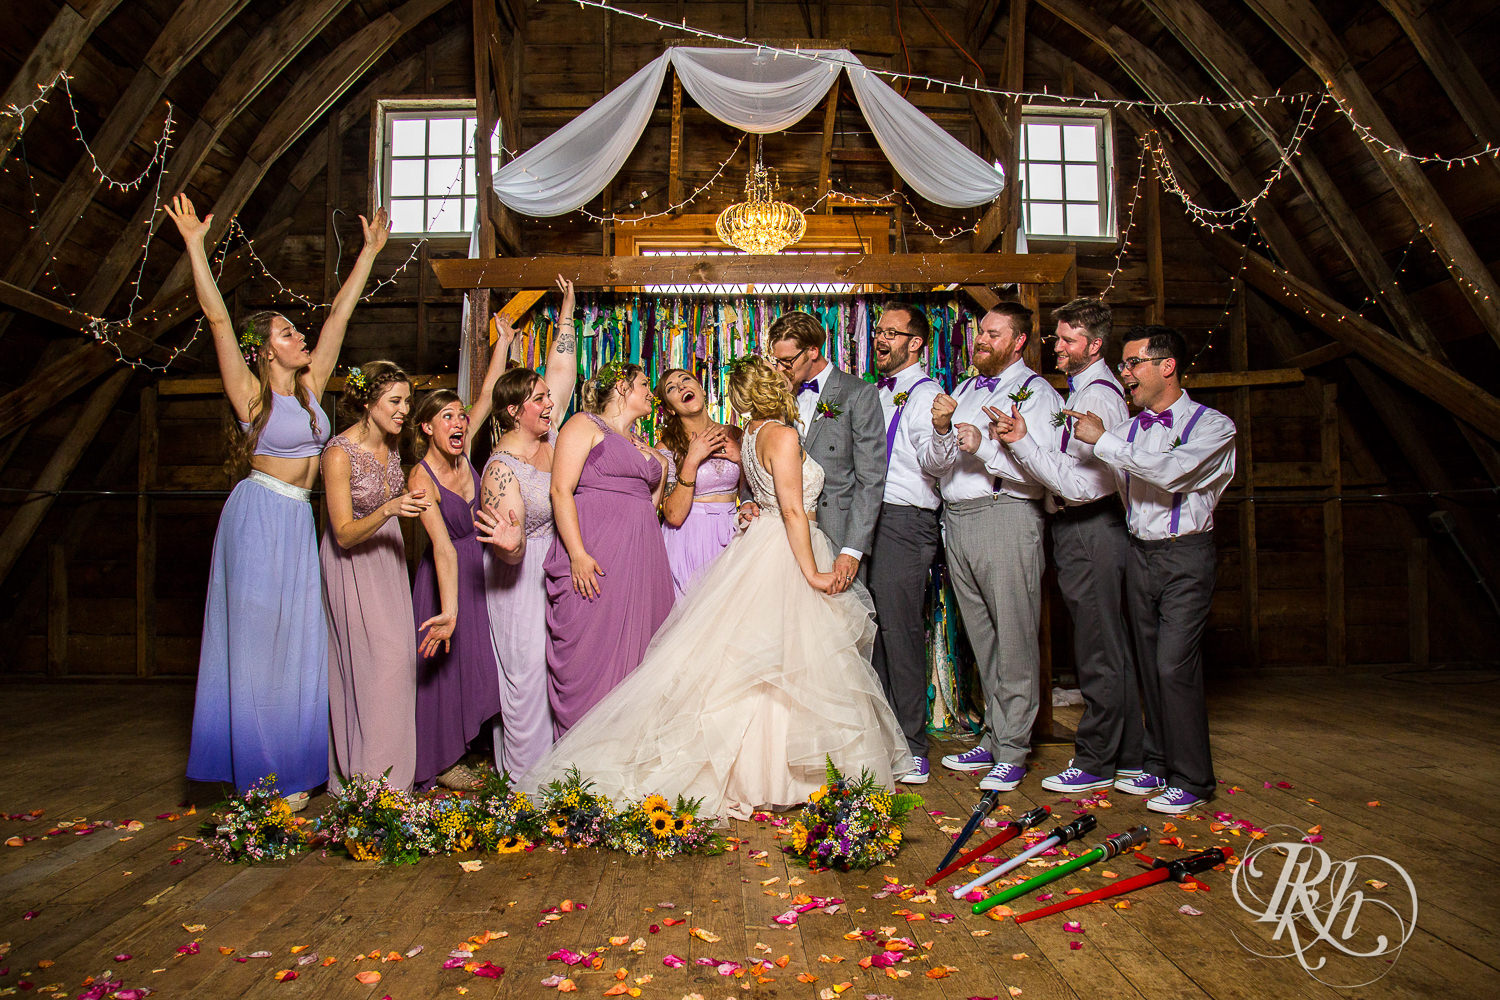 Wedding party smiles with bride and groom at Coops Event Barn in Dodge Center, Minnesota.